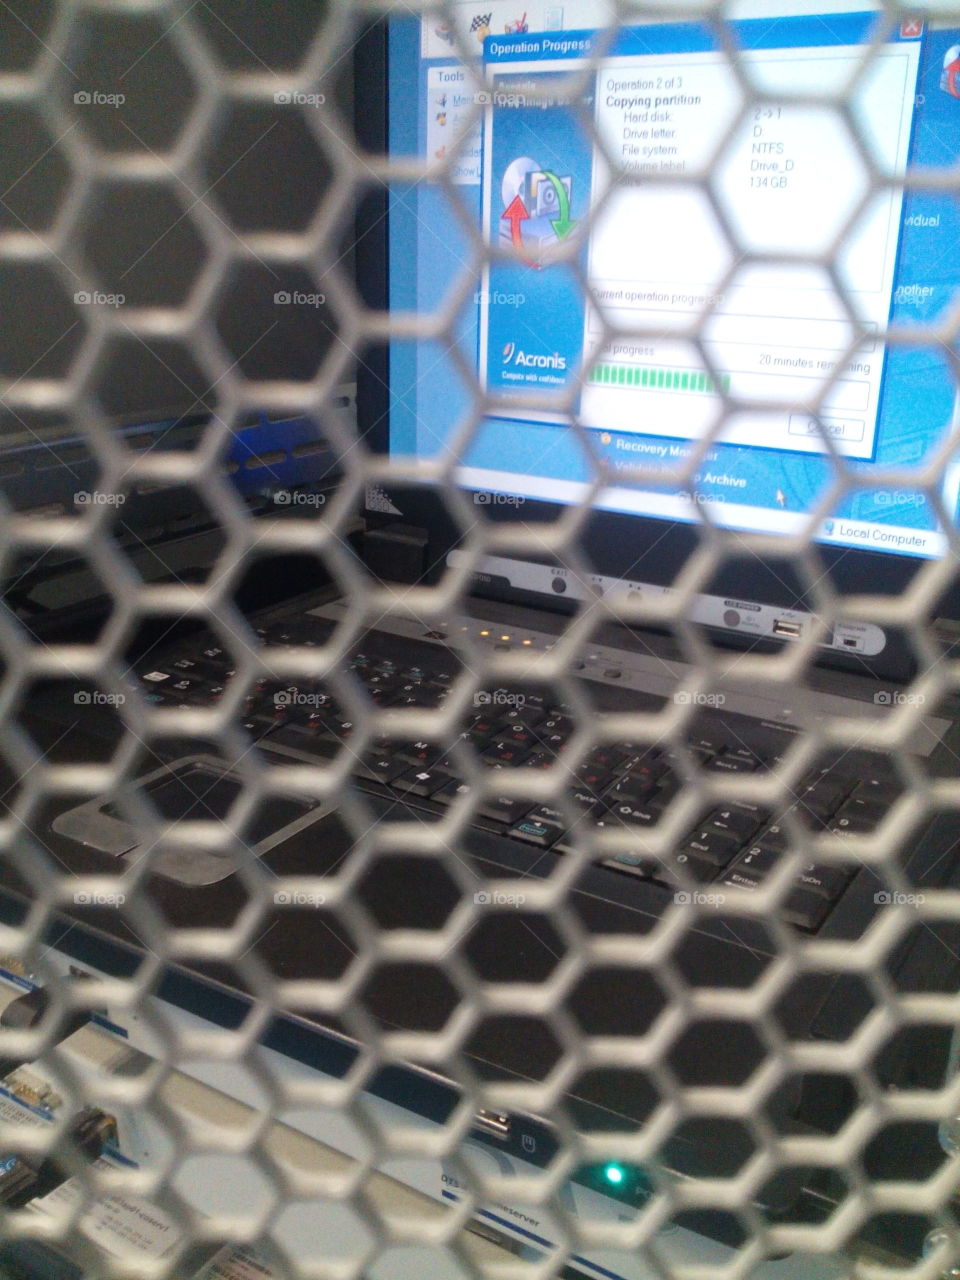 Look through the metal grille in the form of a honeycomb